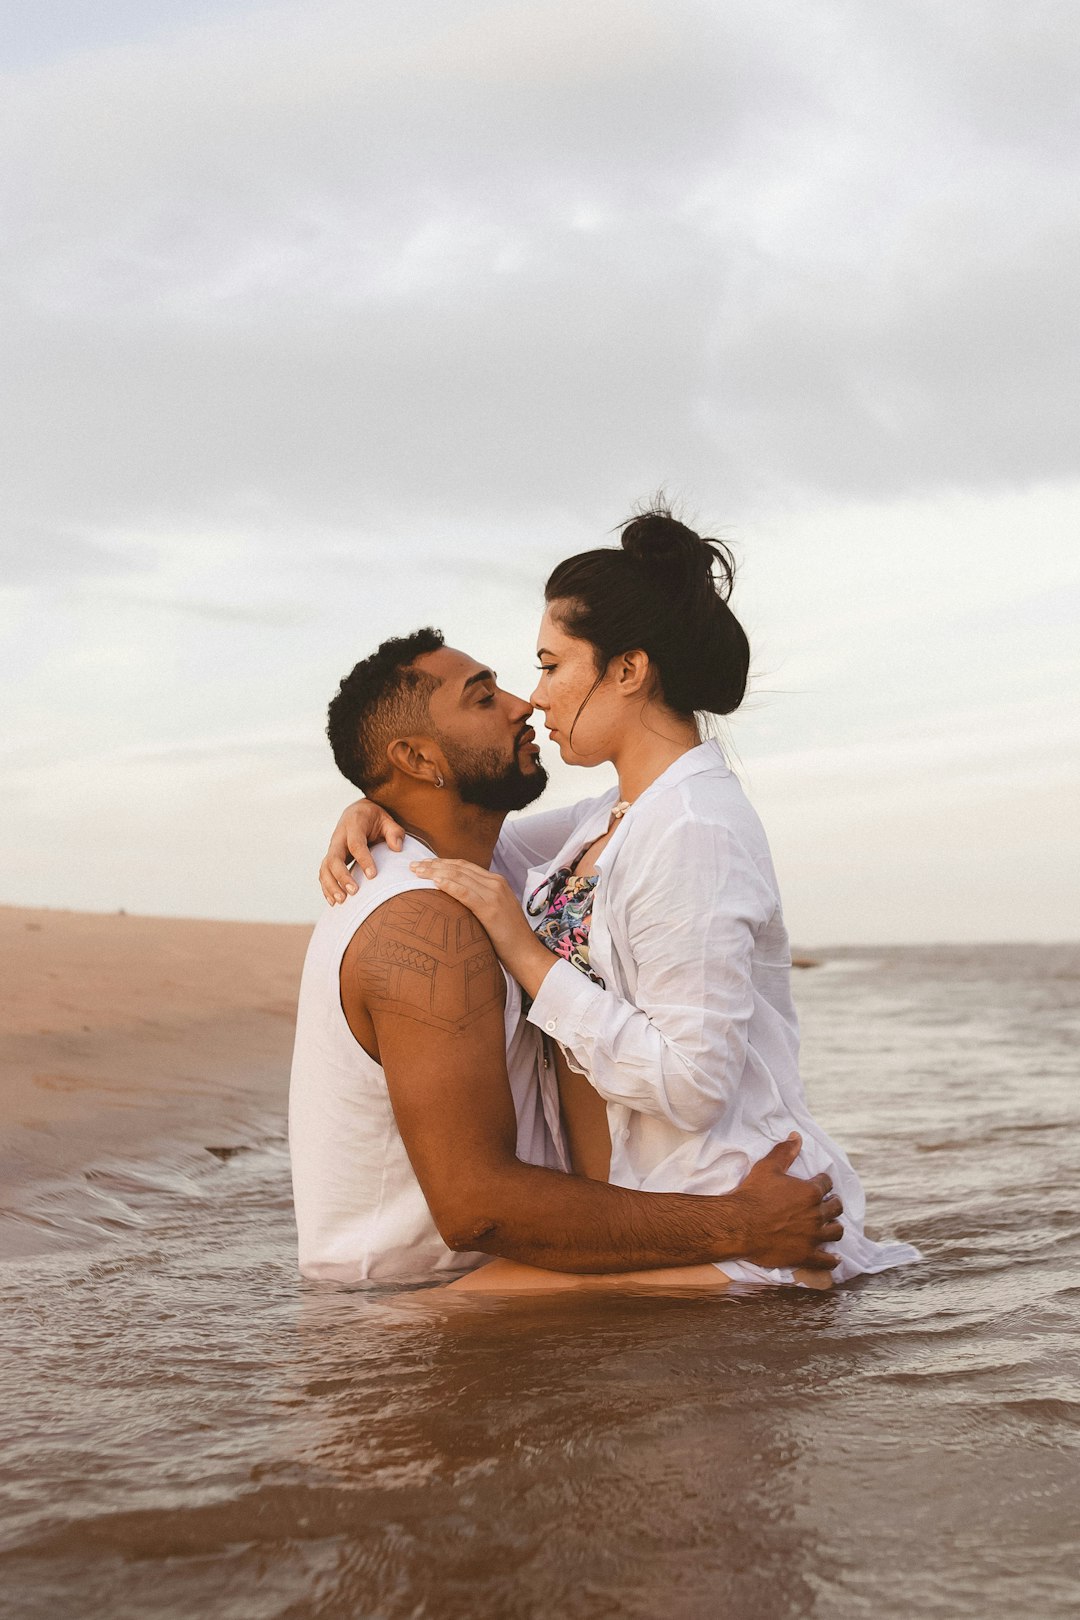 man in white dress shirt kissing woman in white dress on beach during daytime